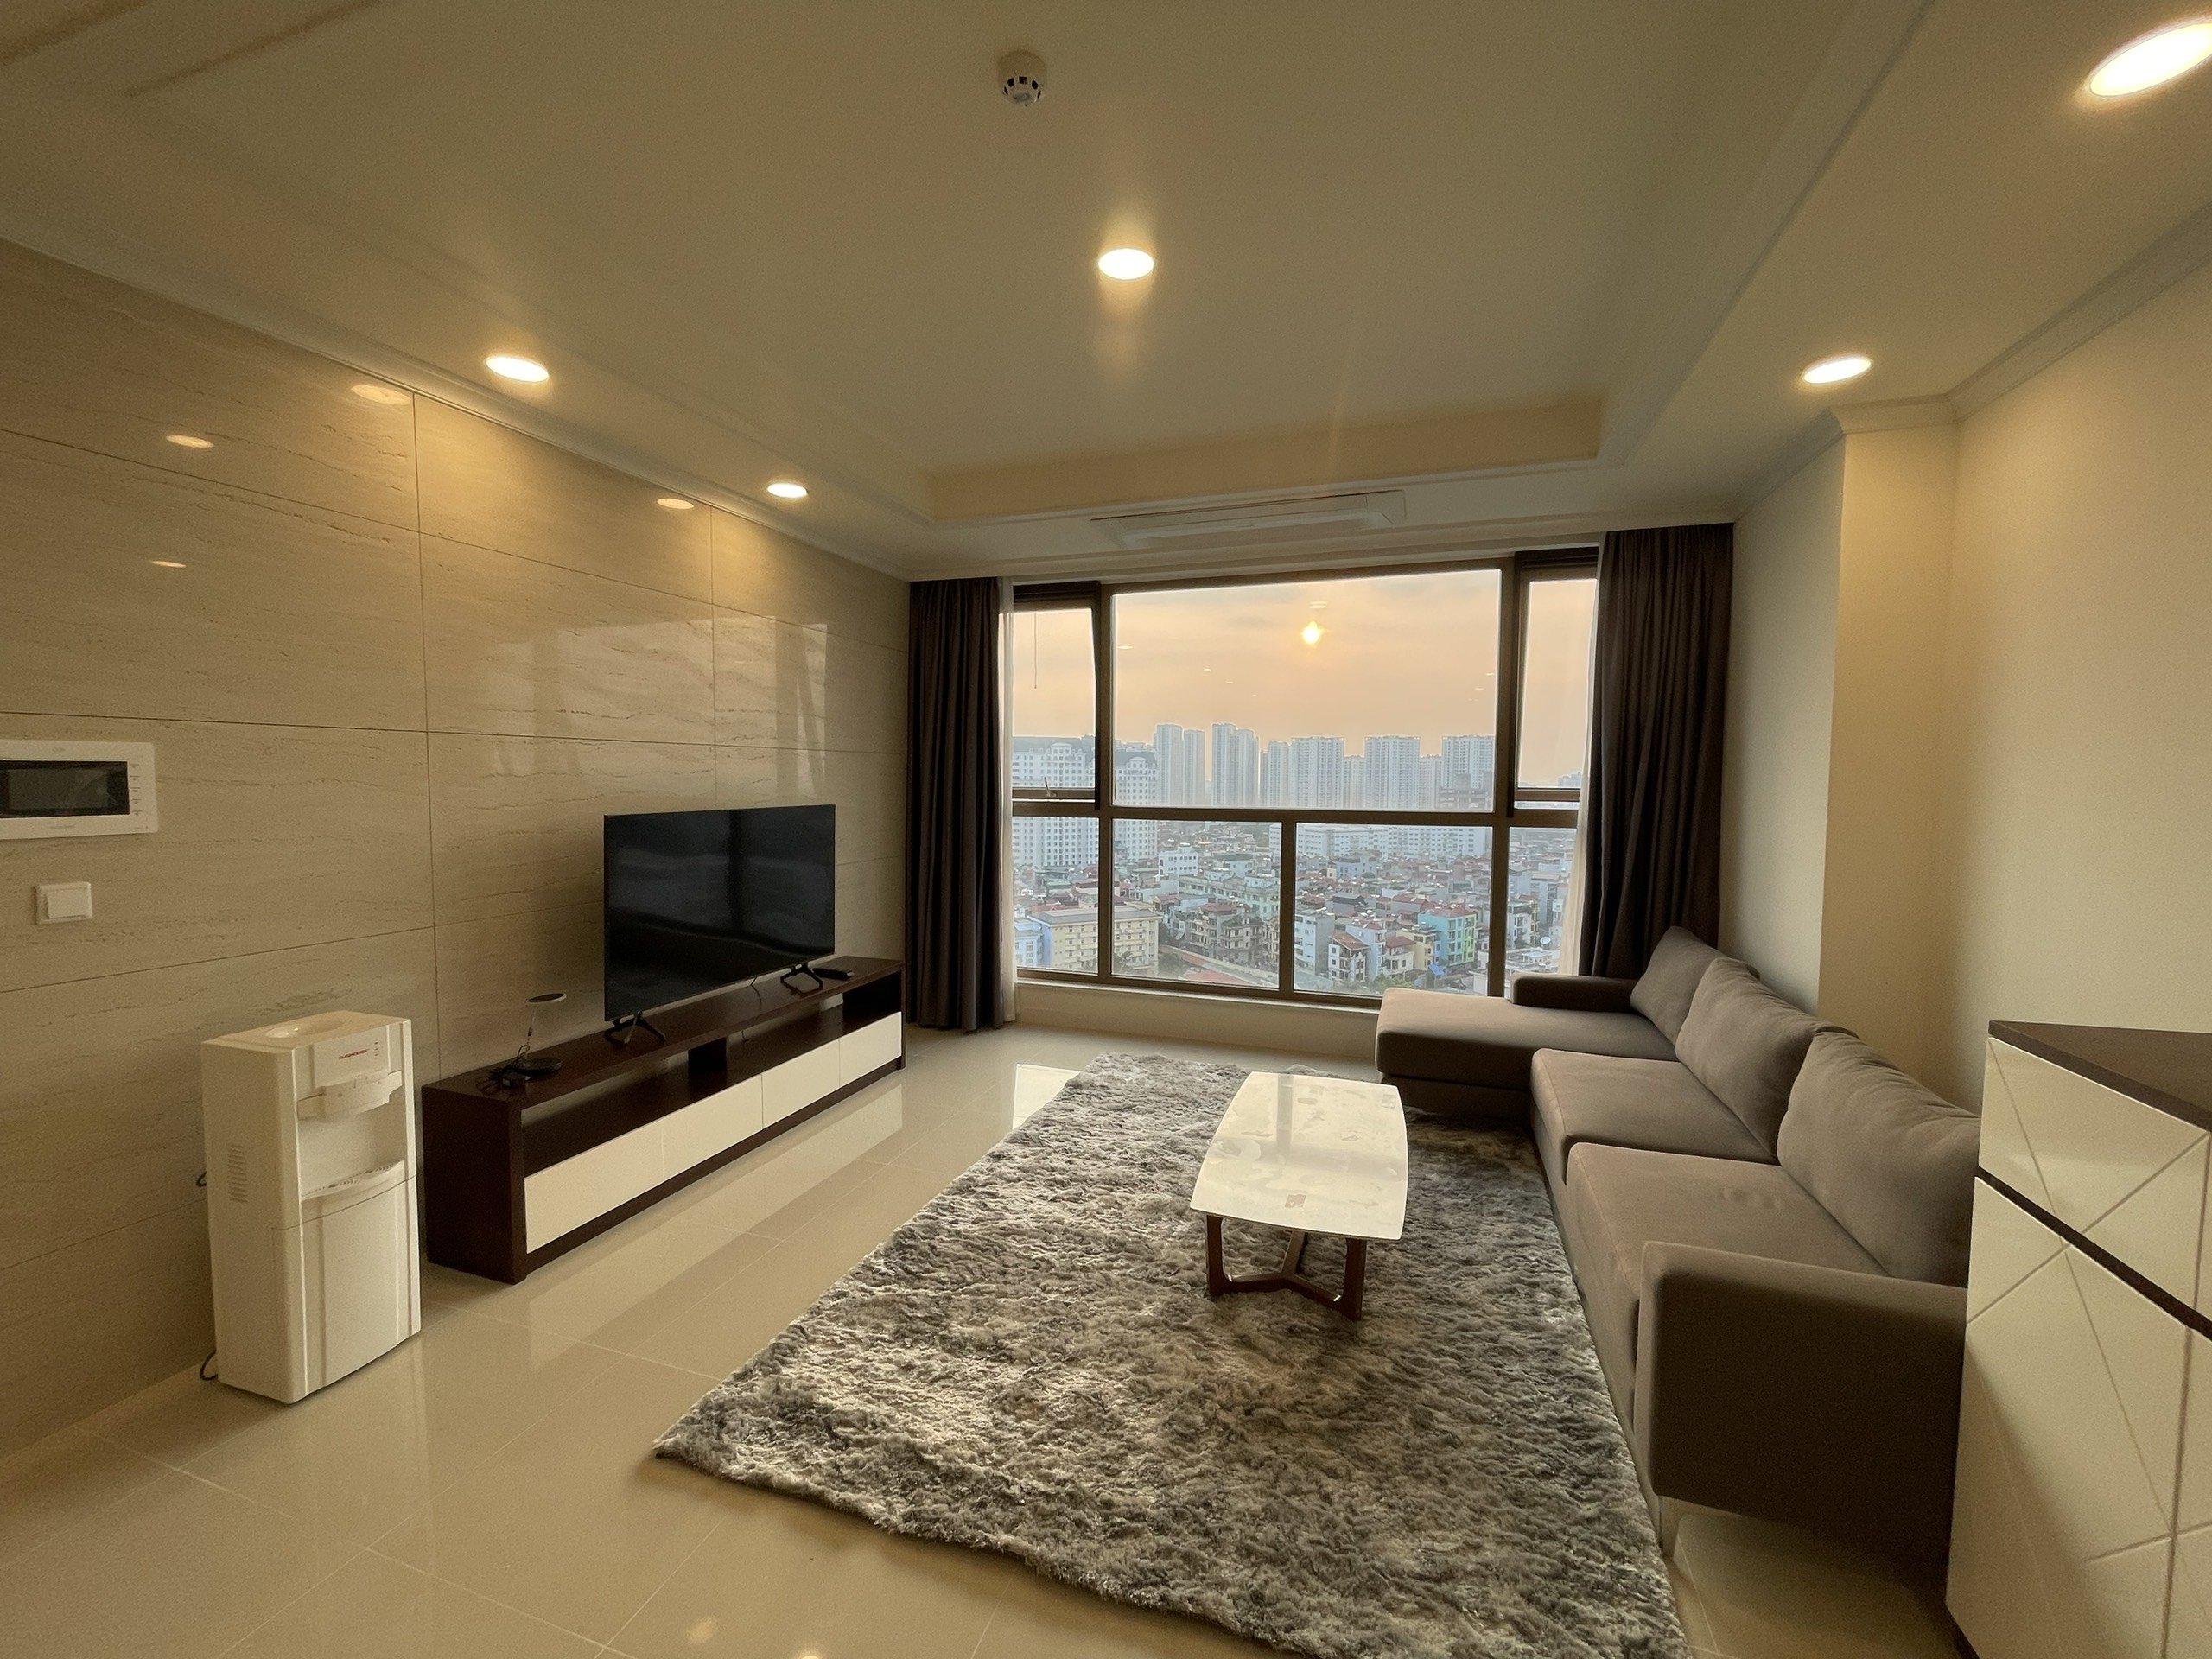 3 bedroom apartment with modern furnishings for rent in 901A Starlake